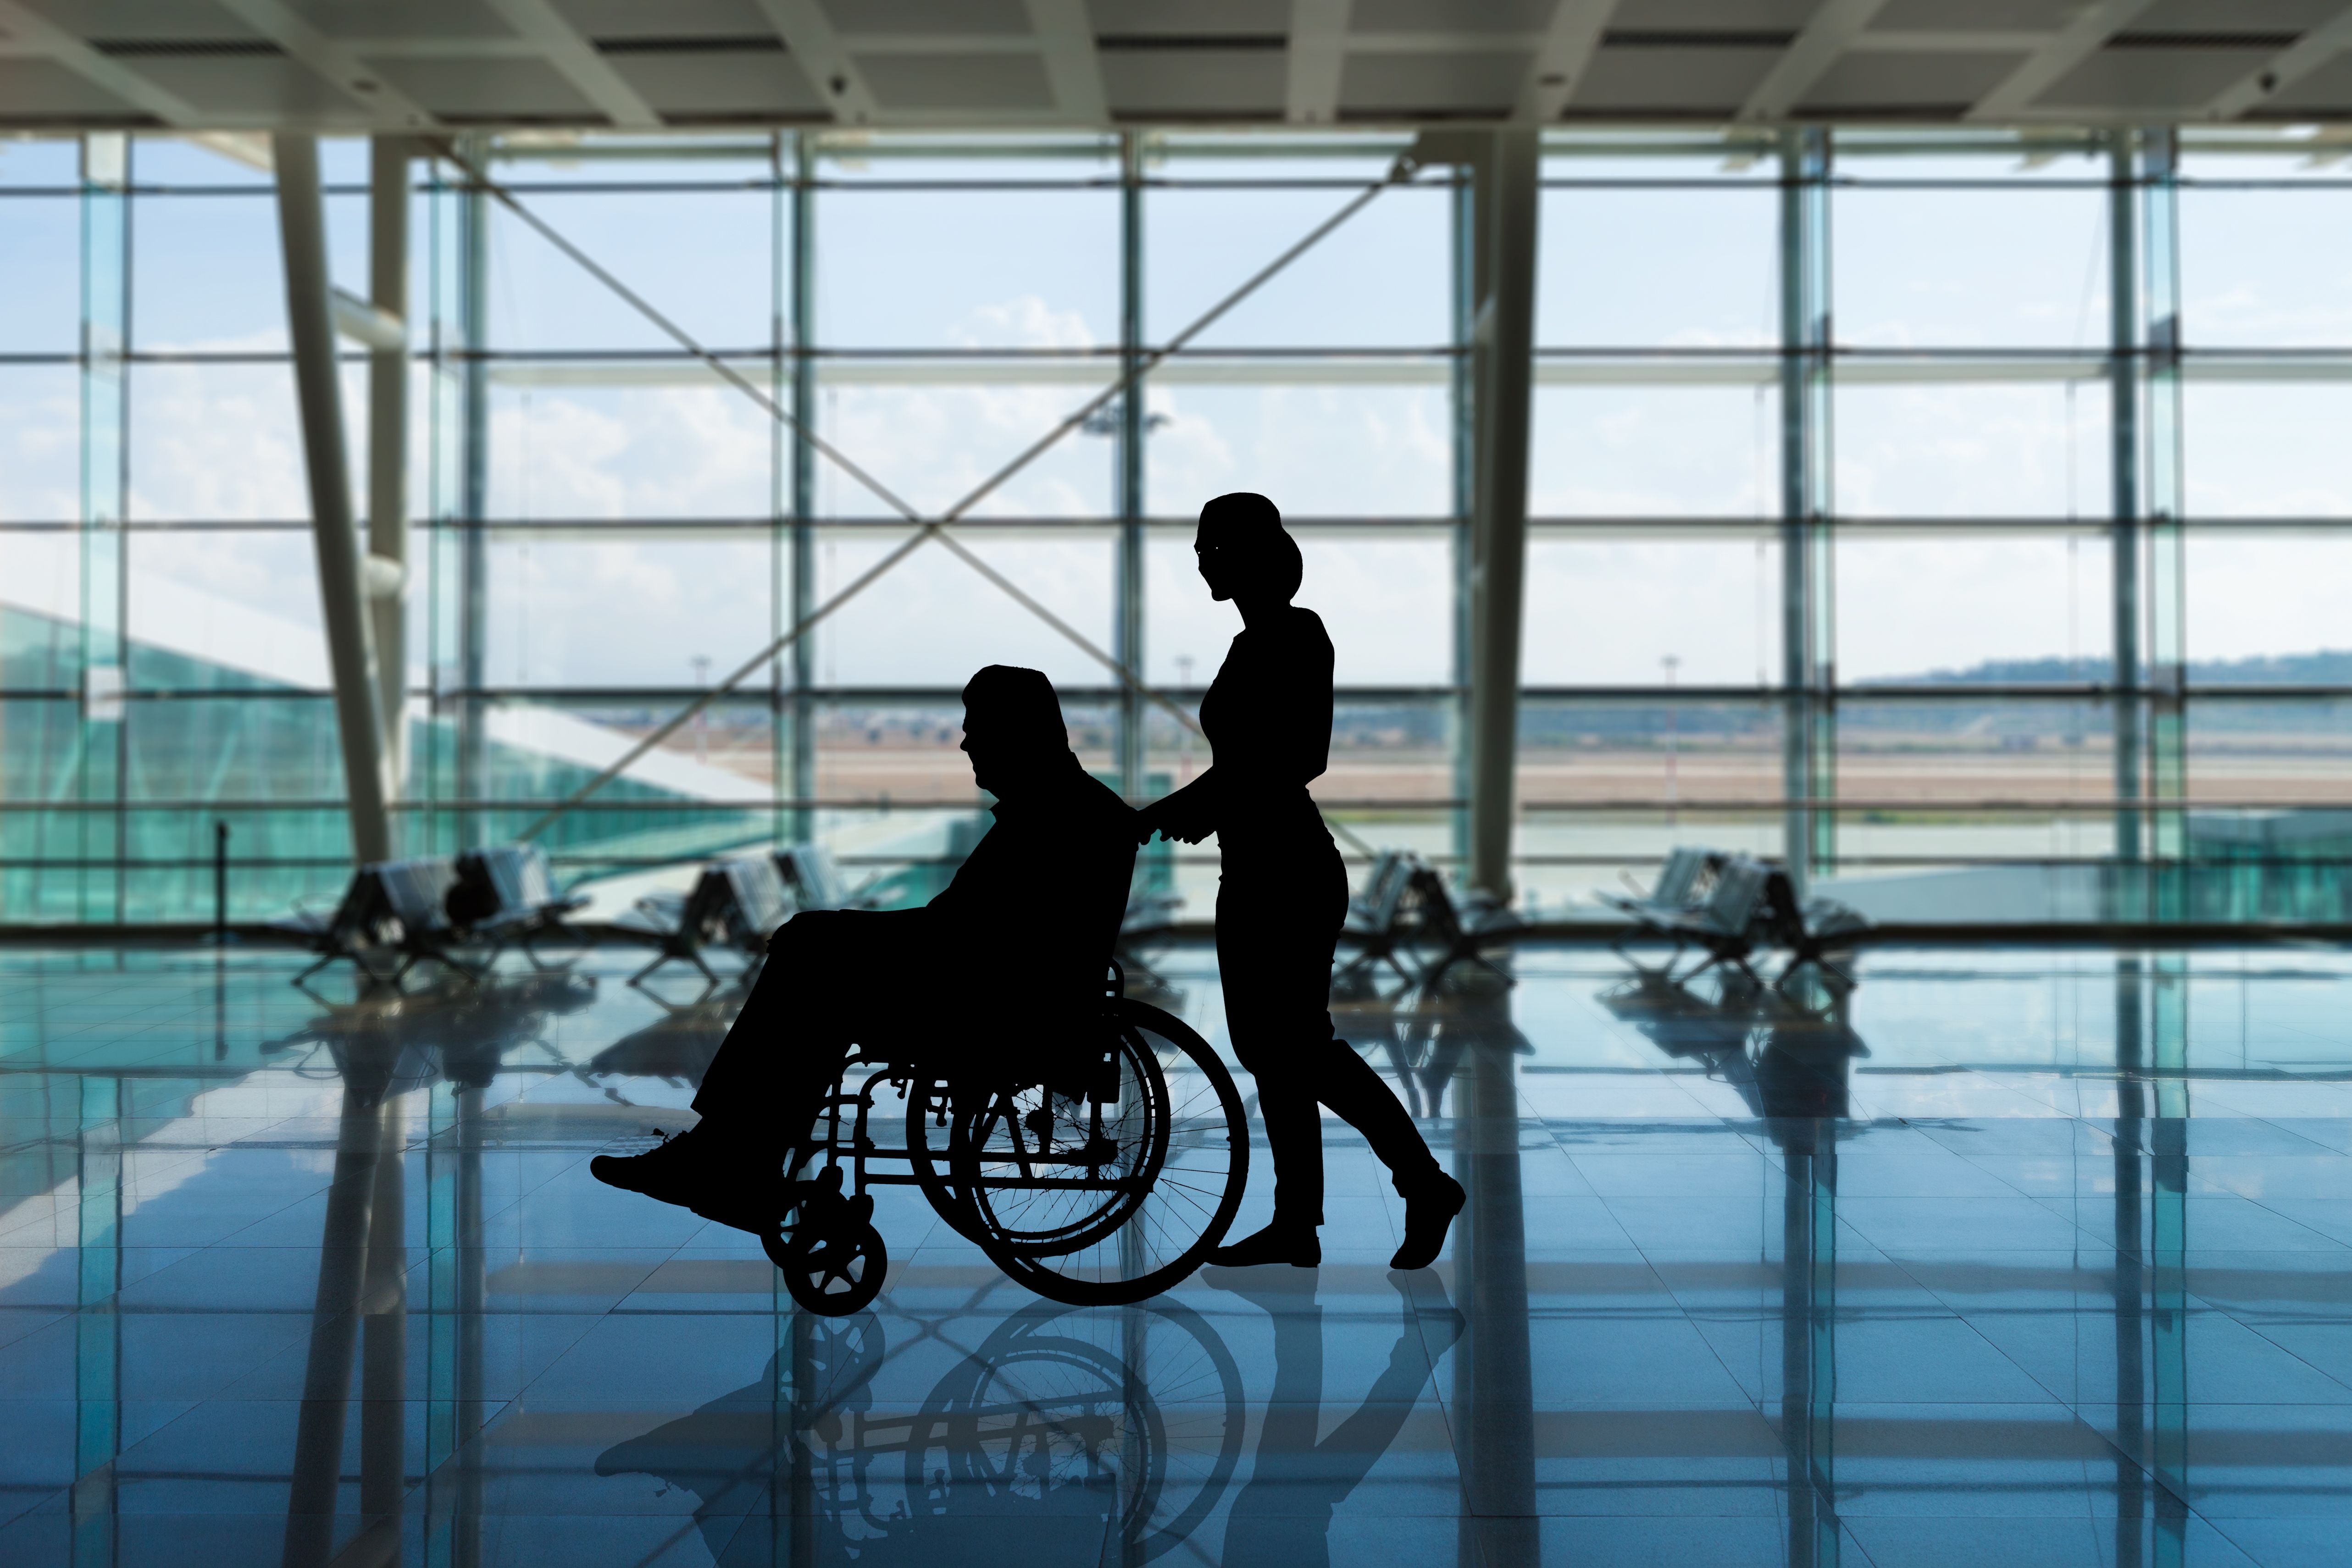 Disabled airport use shutterstock_1588833463